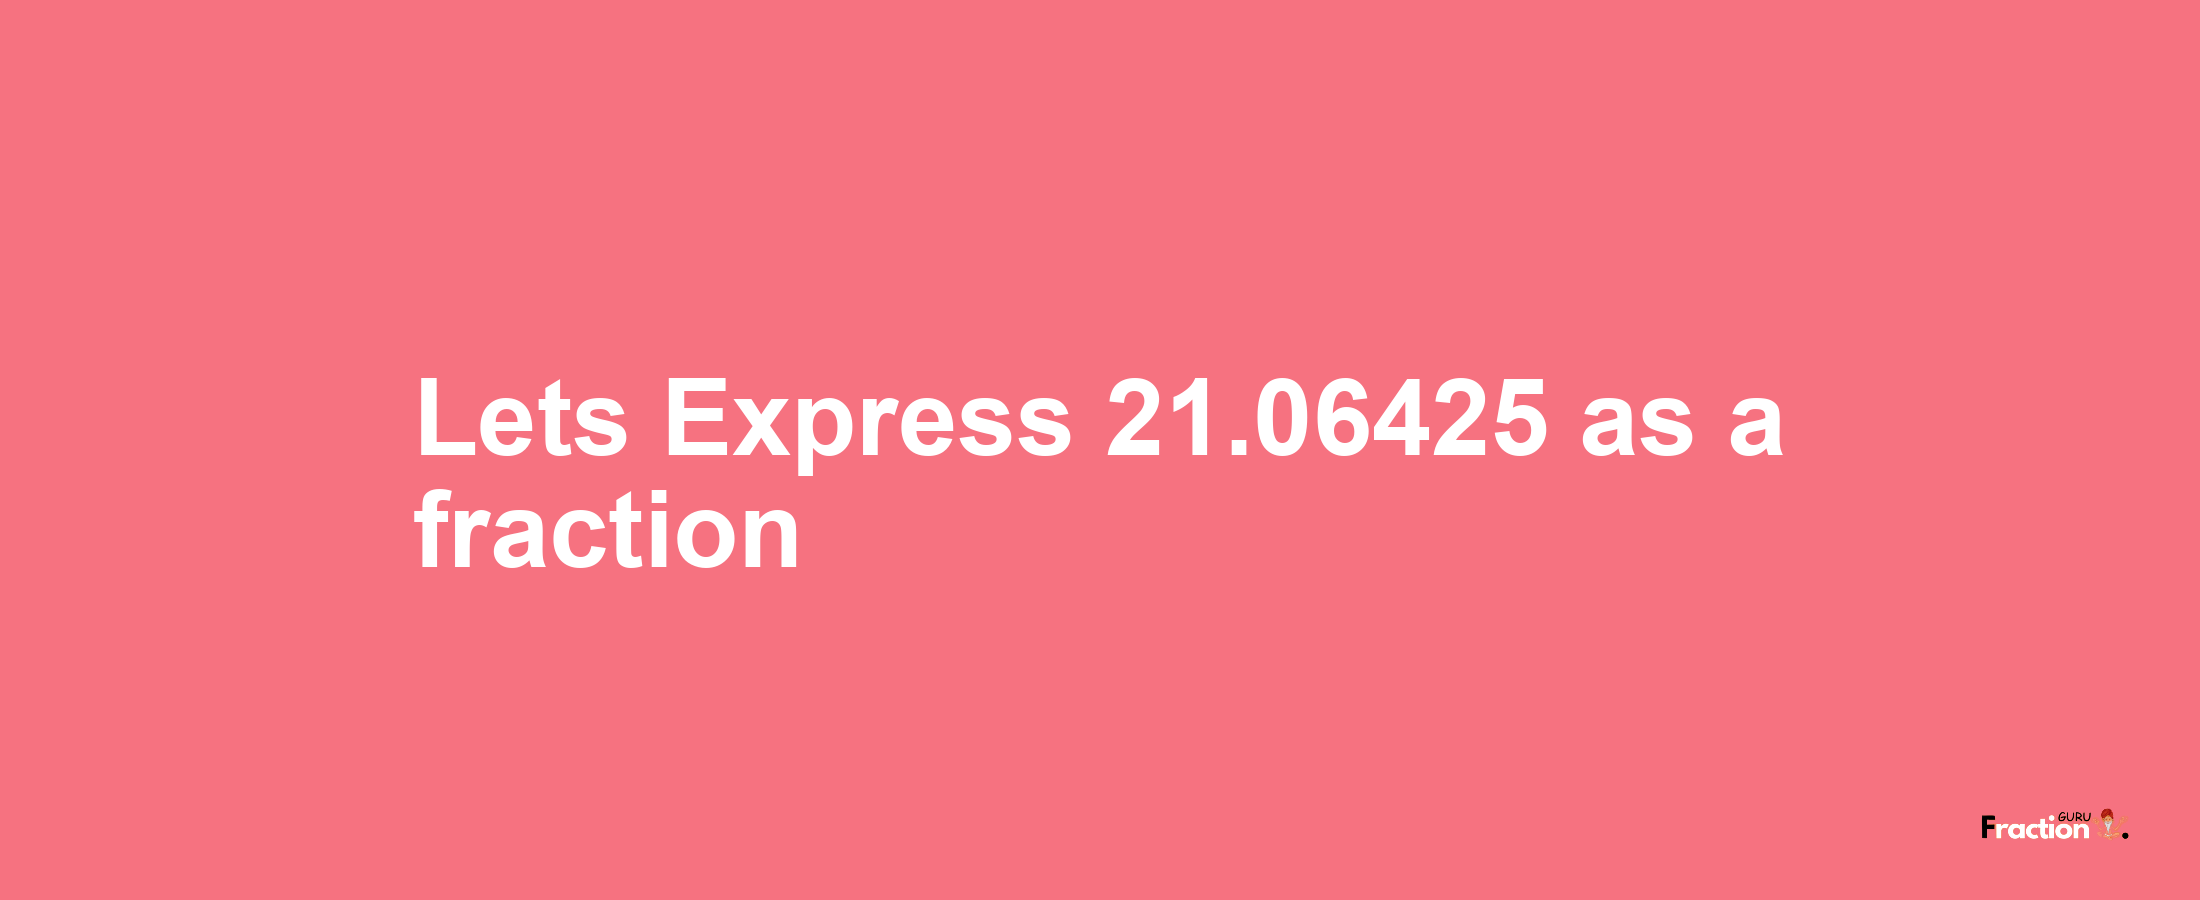 Lets Express 21.06425 as afraction